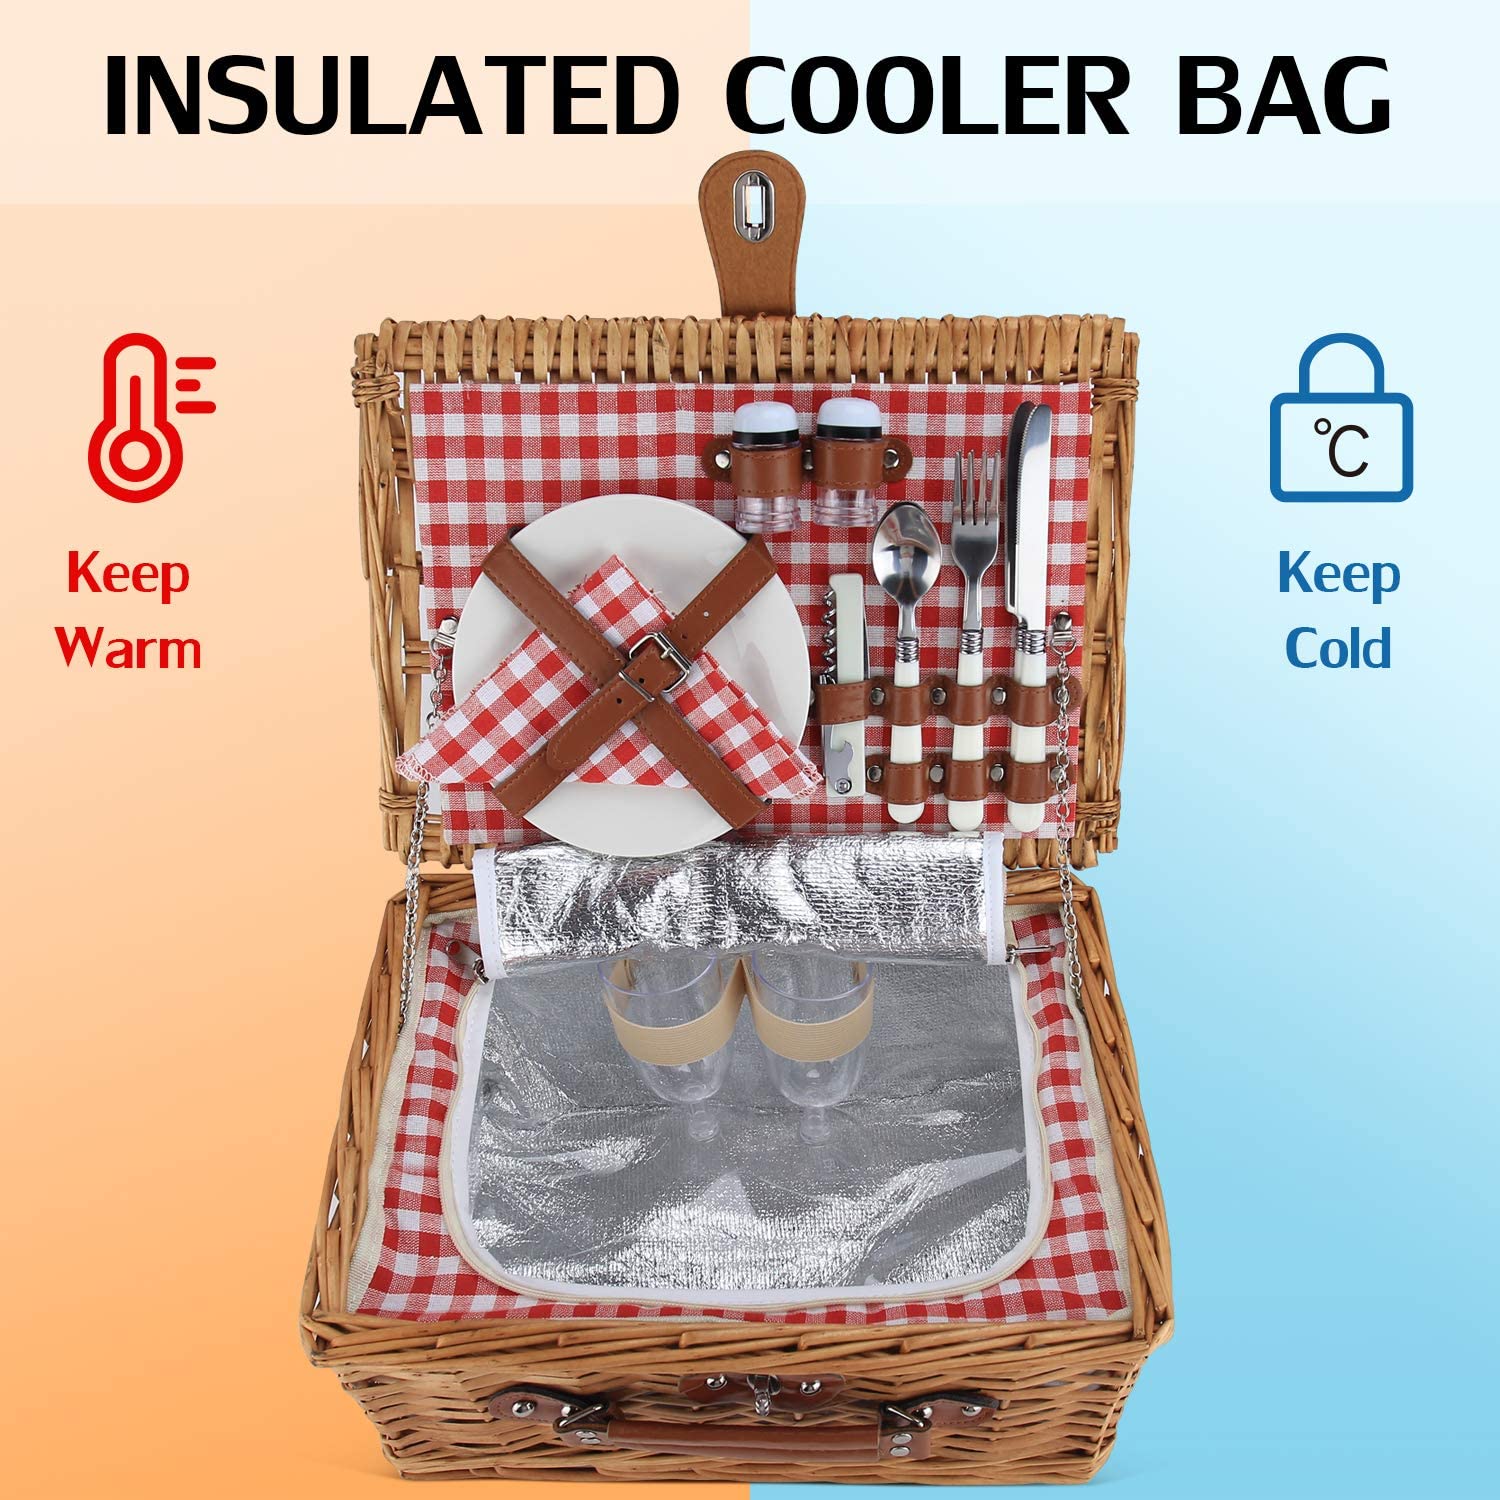 Picnic Basket with Cooler Bag for 2-People - Red Checkered Design